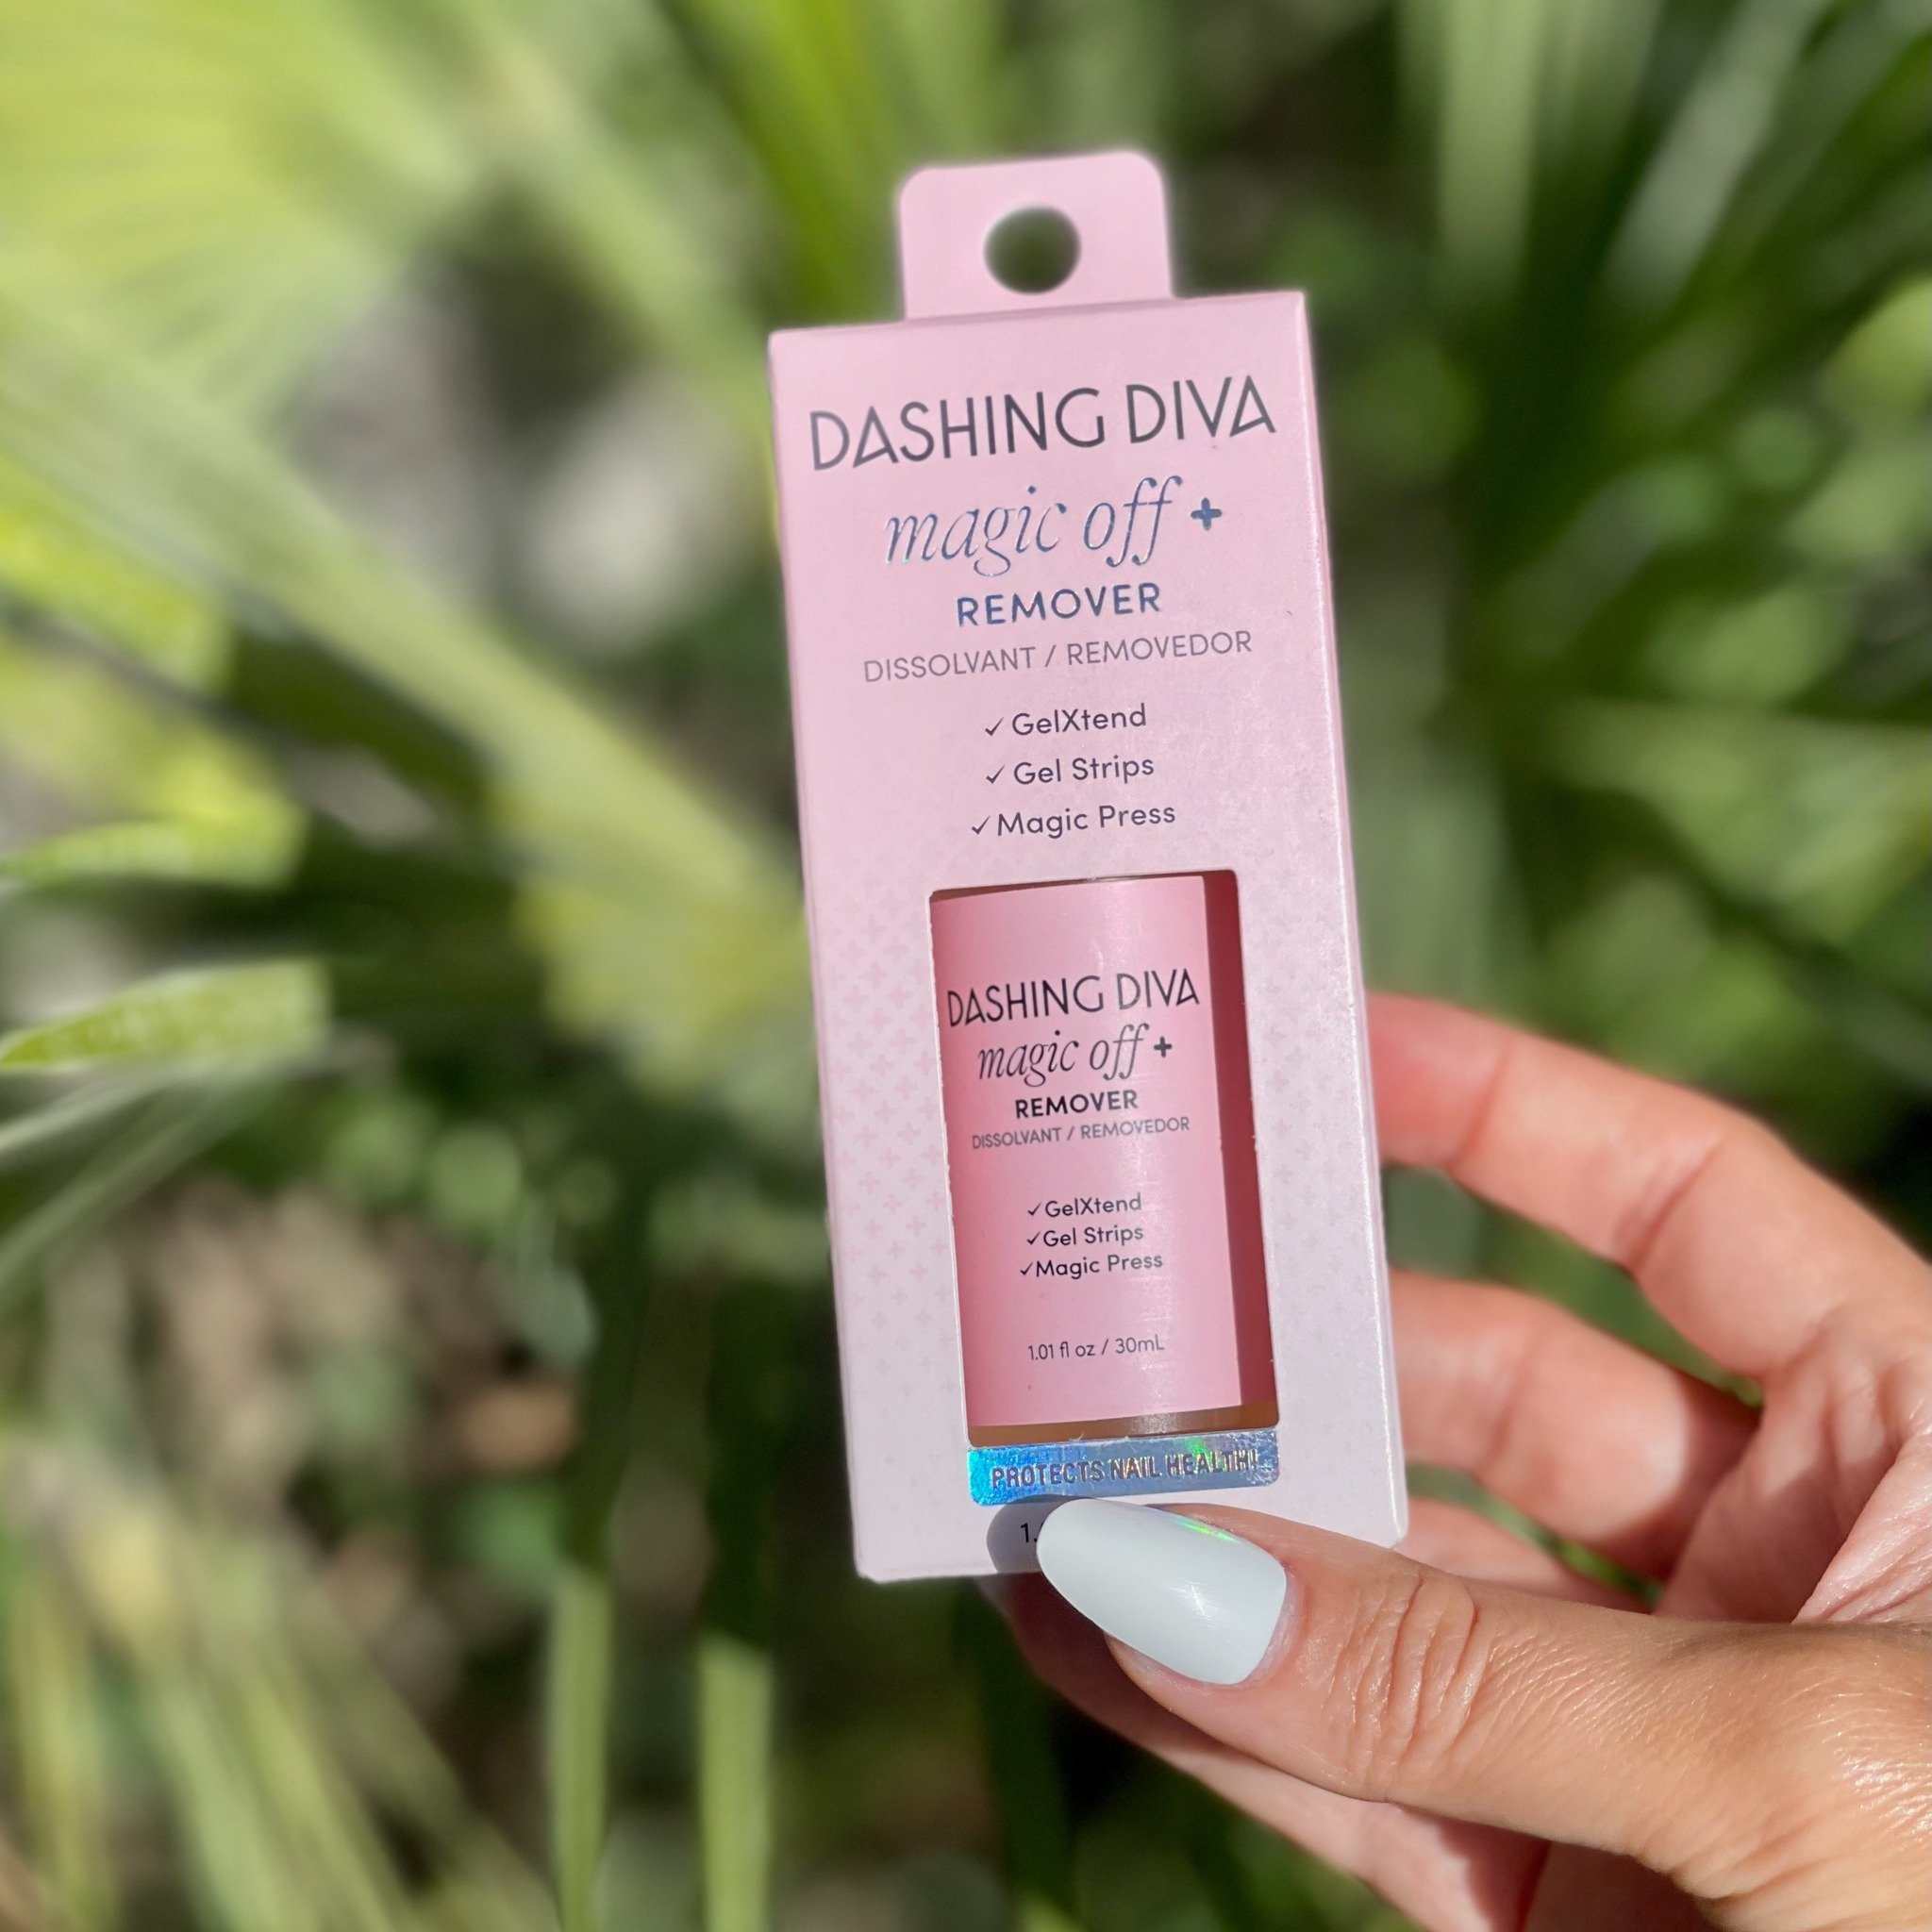 ❤ Press-on Lovers: Have you used @dashingdiva_usa's Magic Off? Thoughts?

#dashingdiva #dashingdivanails #presson #pressons #pressonnails #pressonnailslovers #pressonnailsofinstagram #dashingdivamagicpress💅 #dashingdivamagicpress☺️